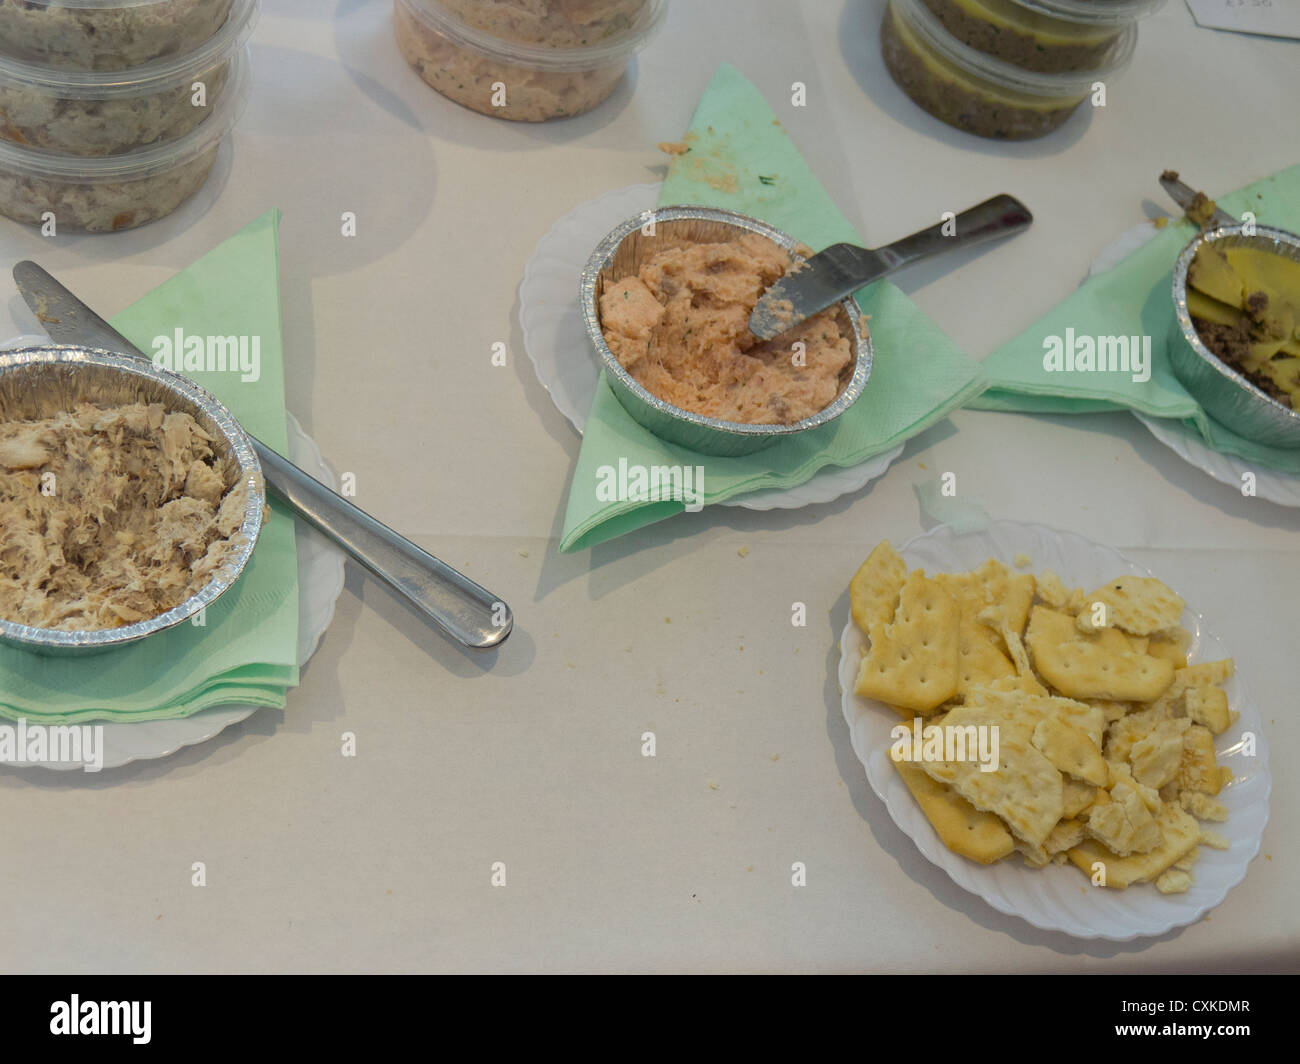 Food tasting area for local produce on a market table. Stock Photo